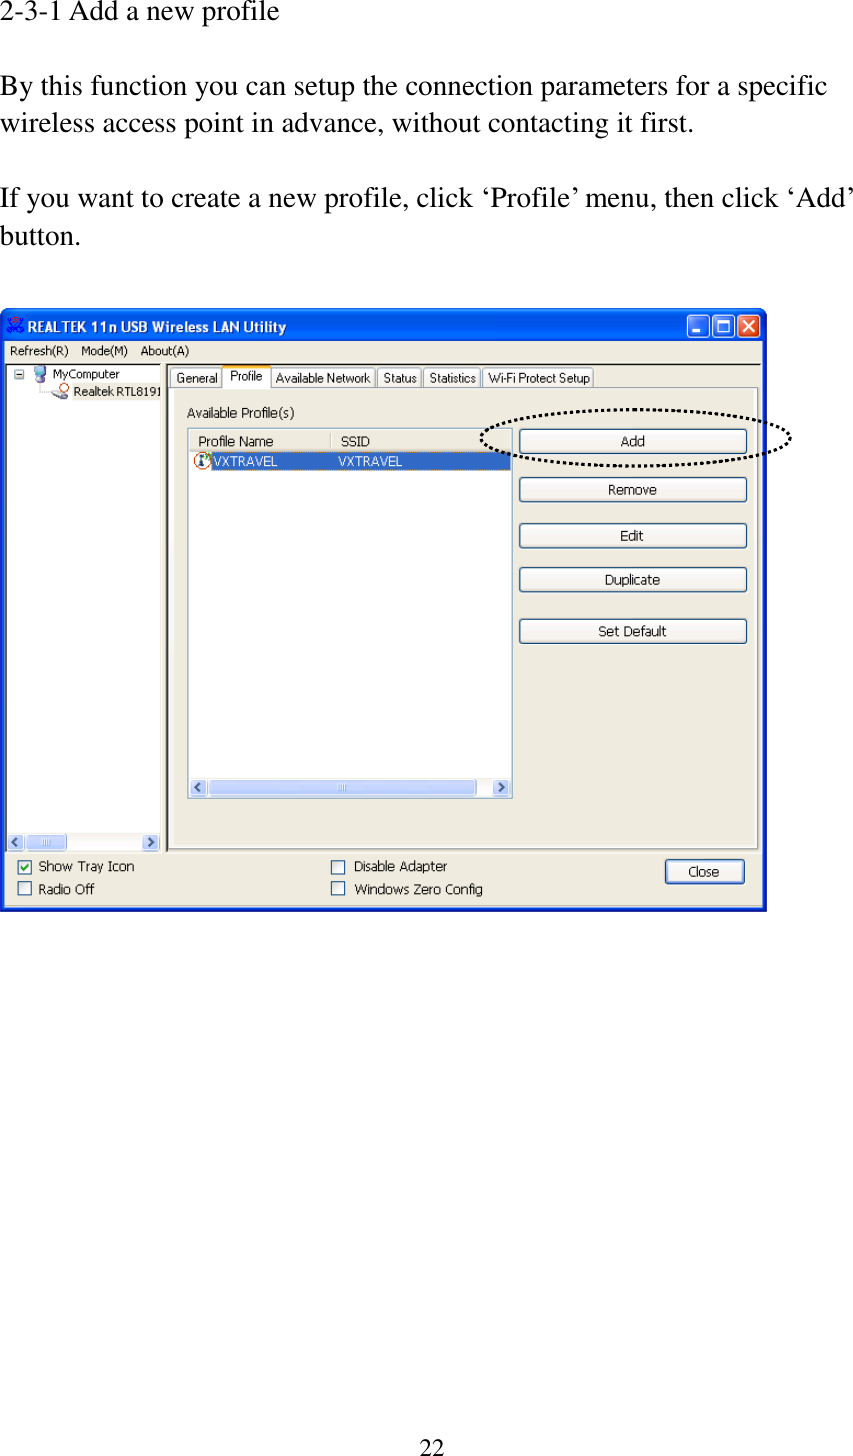 22  2-3-1 Add a new profile  By this function you can setup the connection parameters for a specific wireless access point in advance, without contacting it first.  If you want to create a new profile, click ‘Profile’ menu, then click ‘Add’ button.    